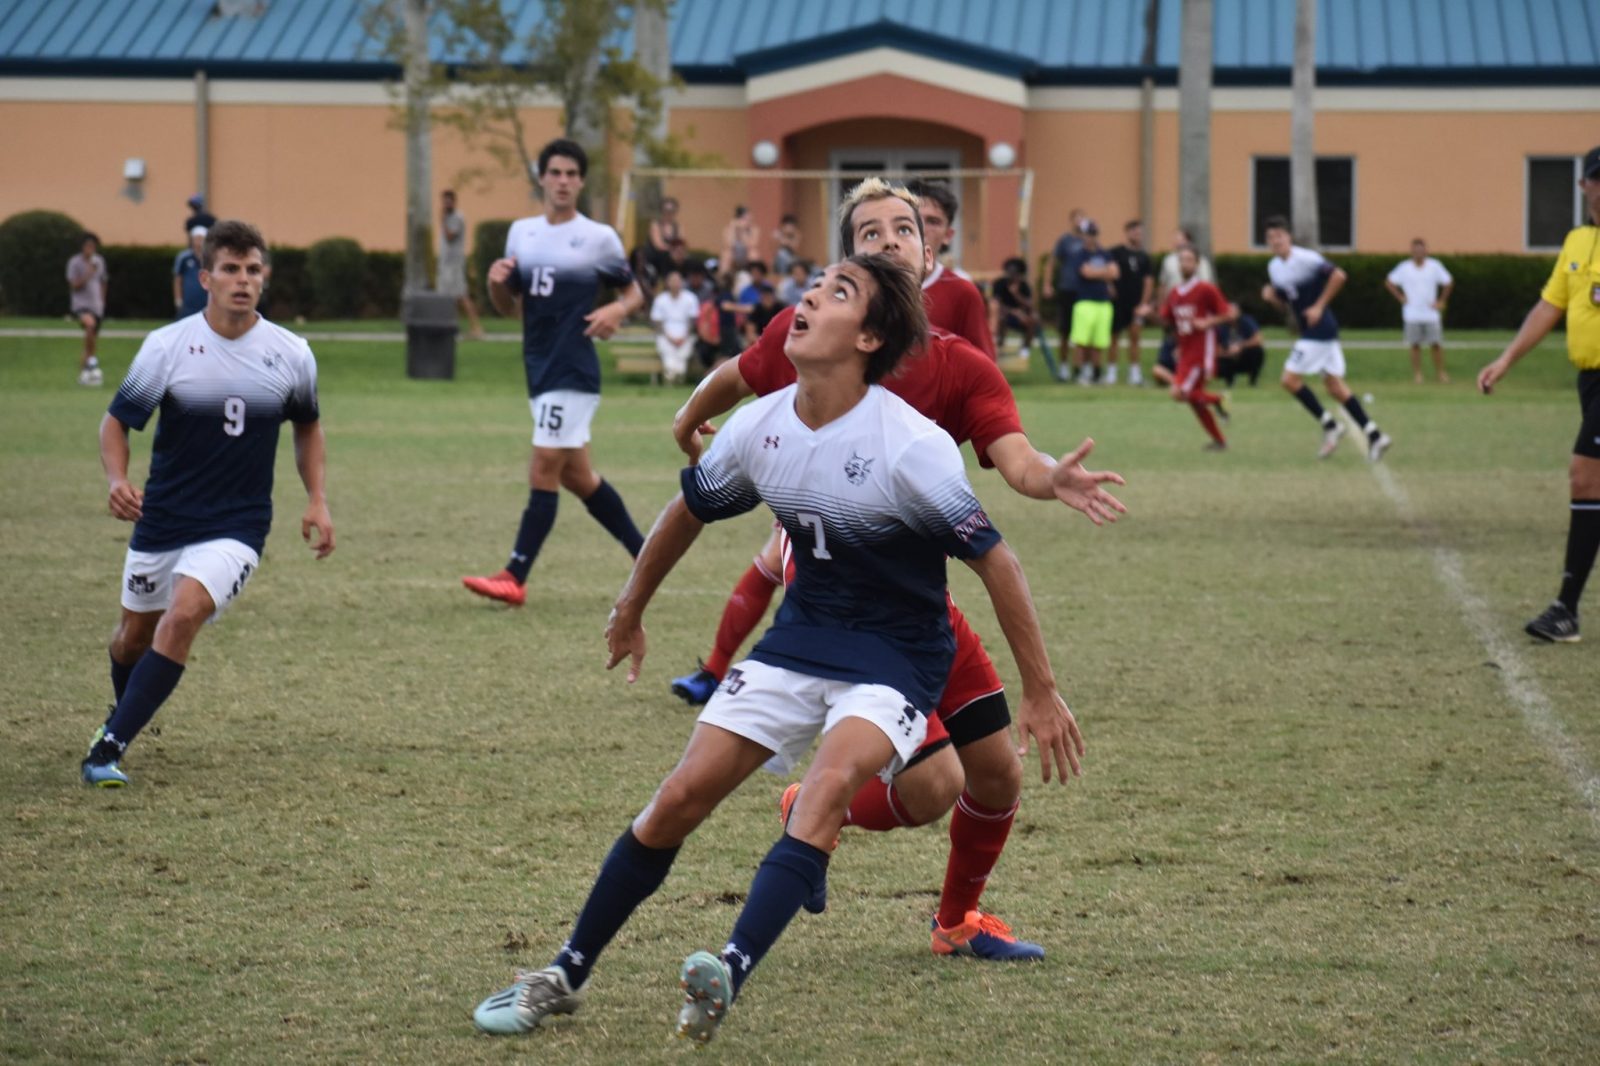 Florida National University player fighting for the ball during the soccer game